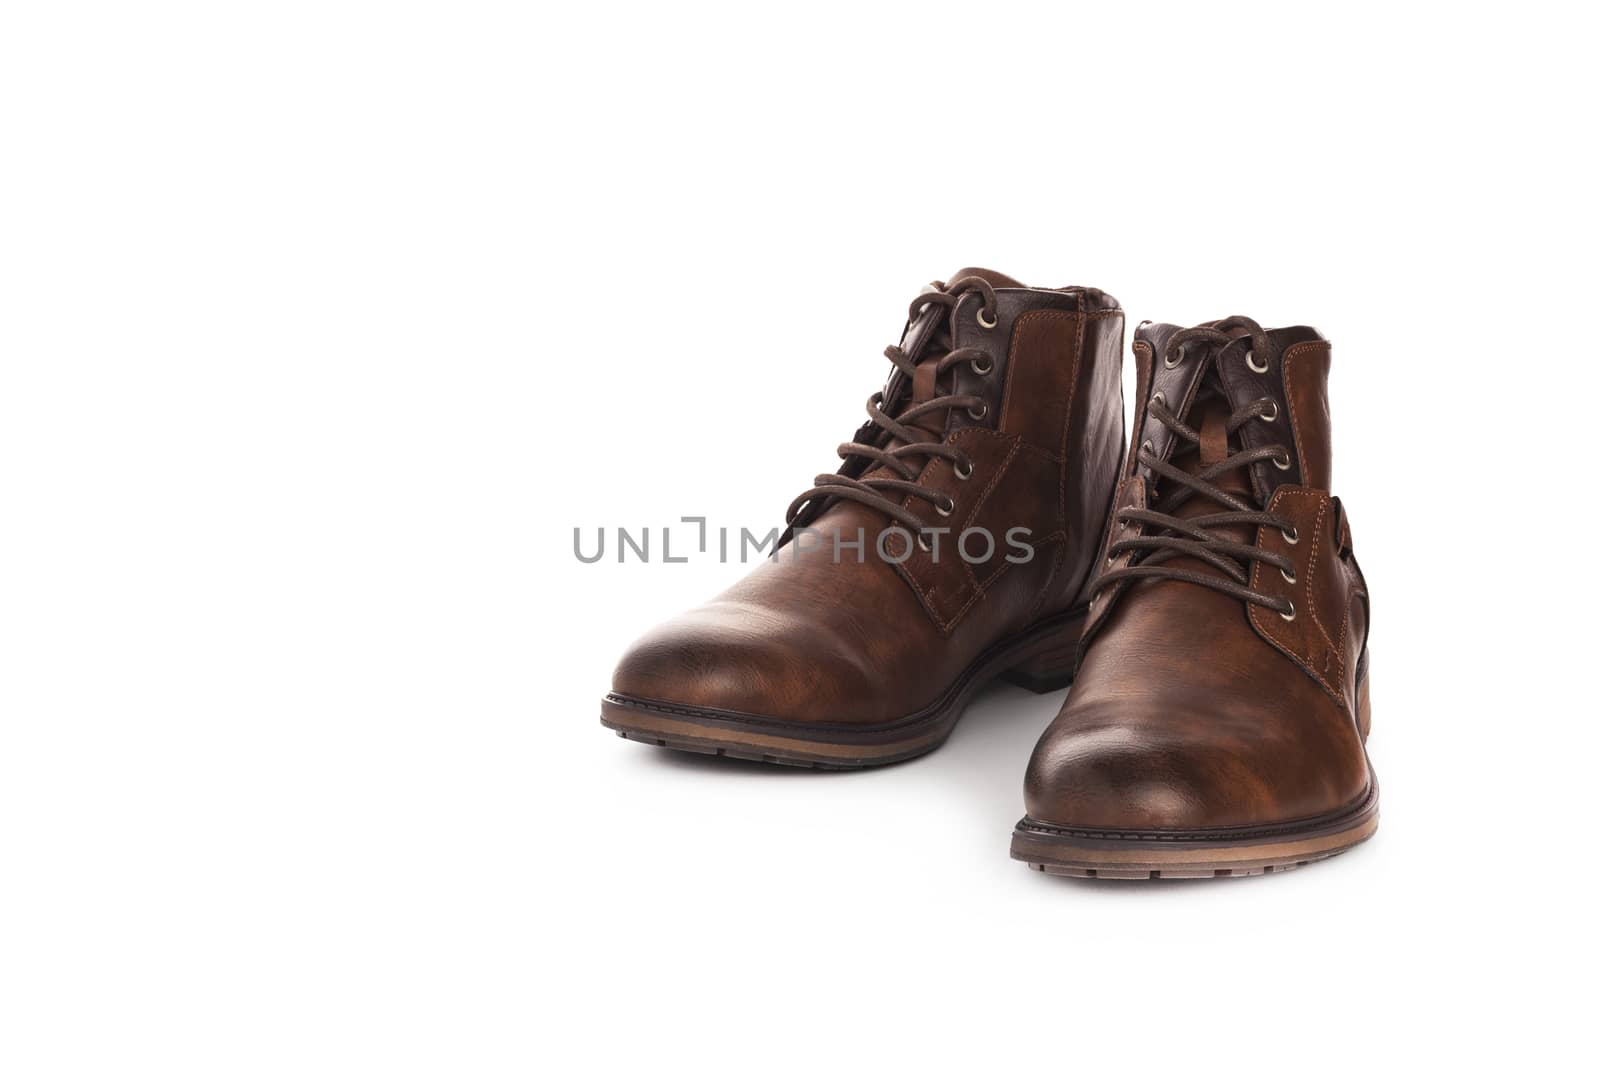 Men's shoes brown casual. Isolated on white background by SlayCer